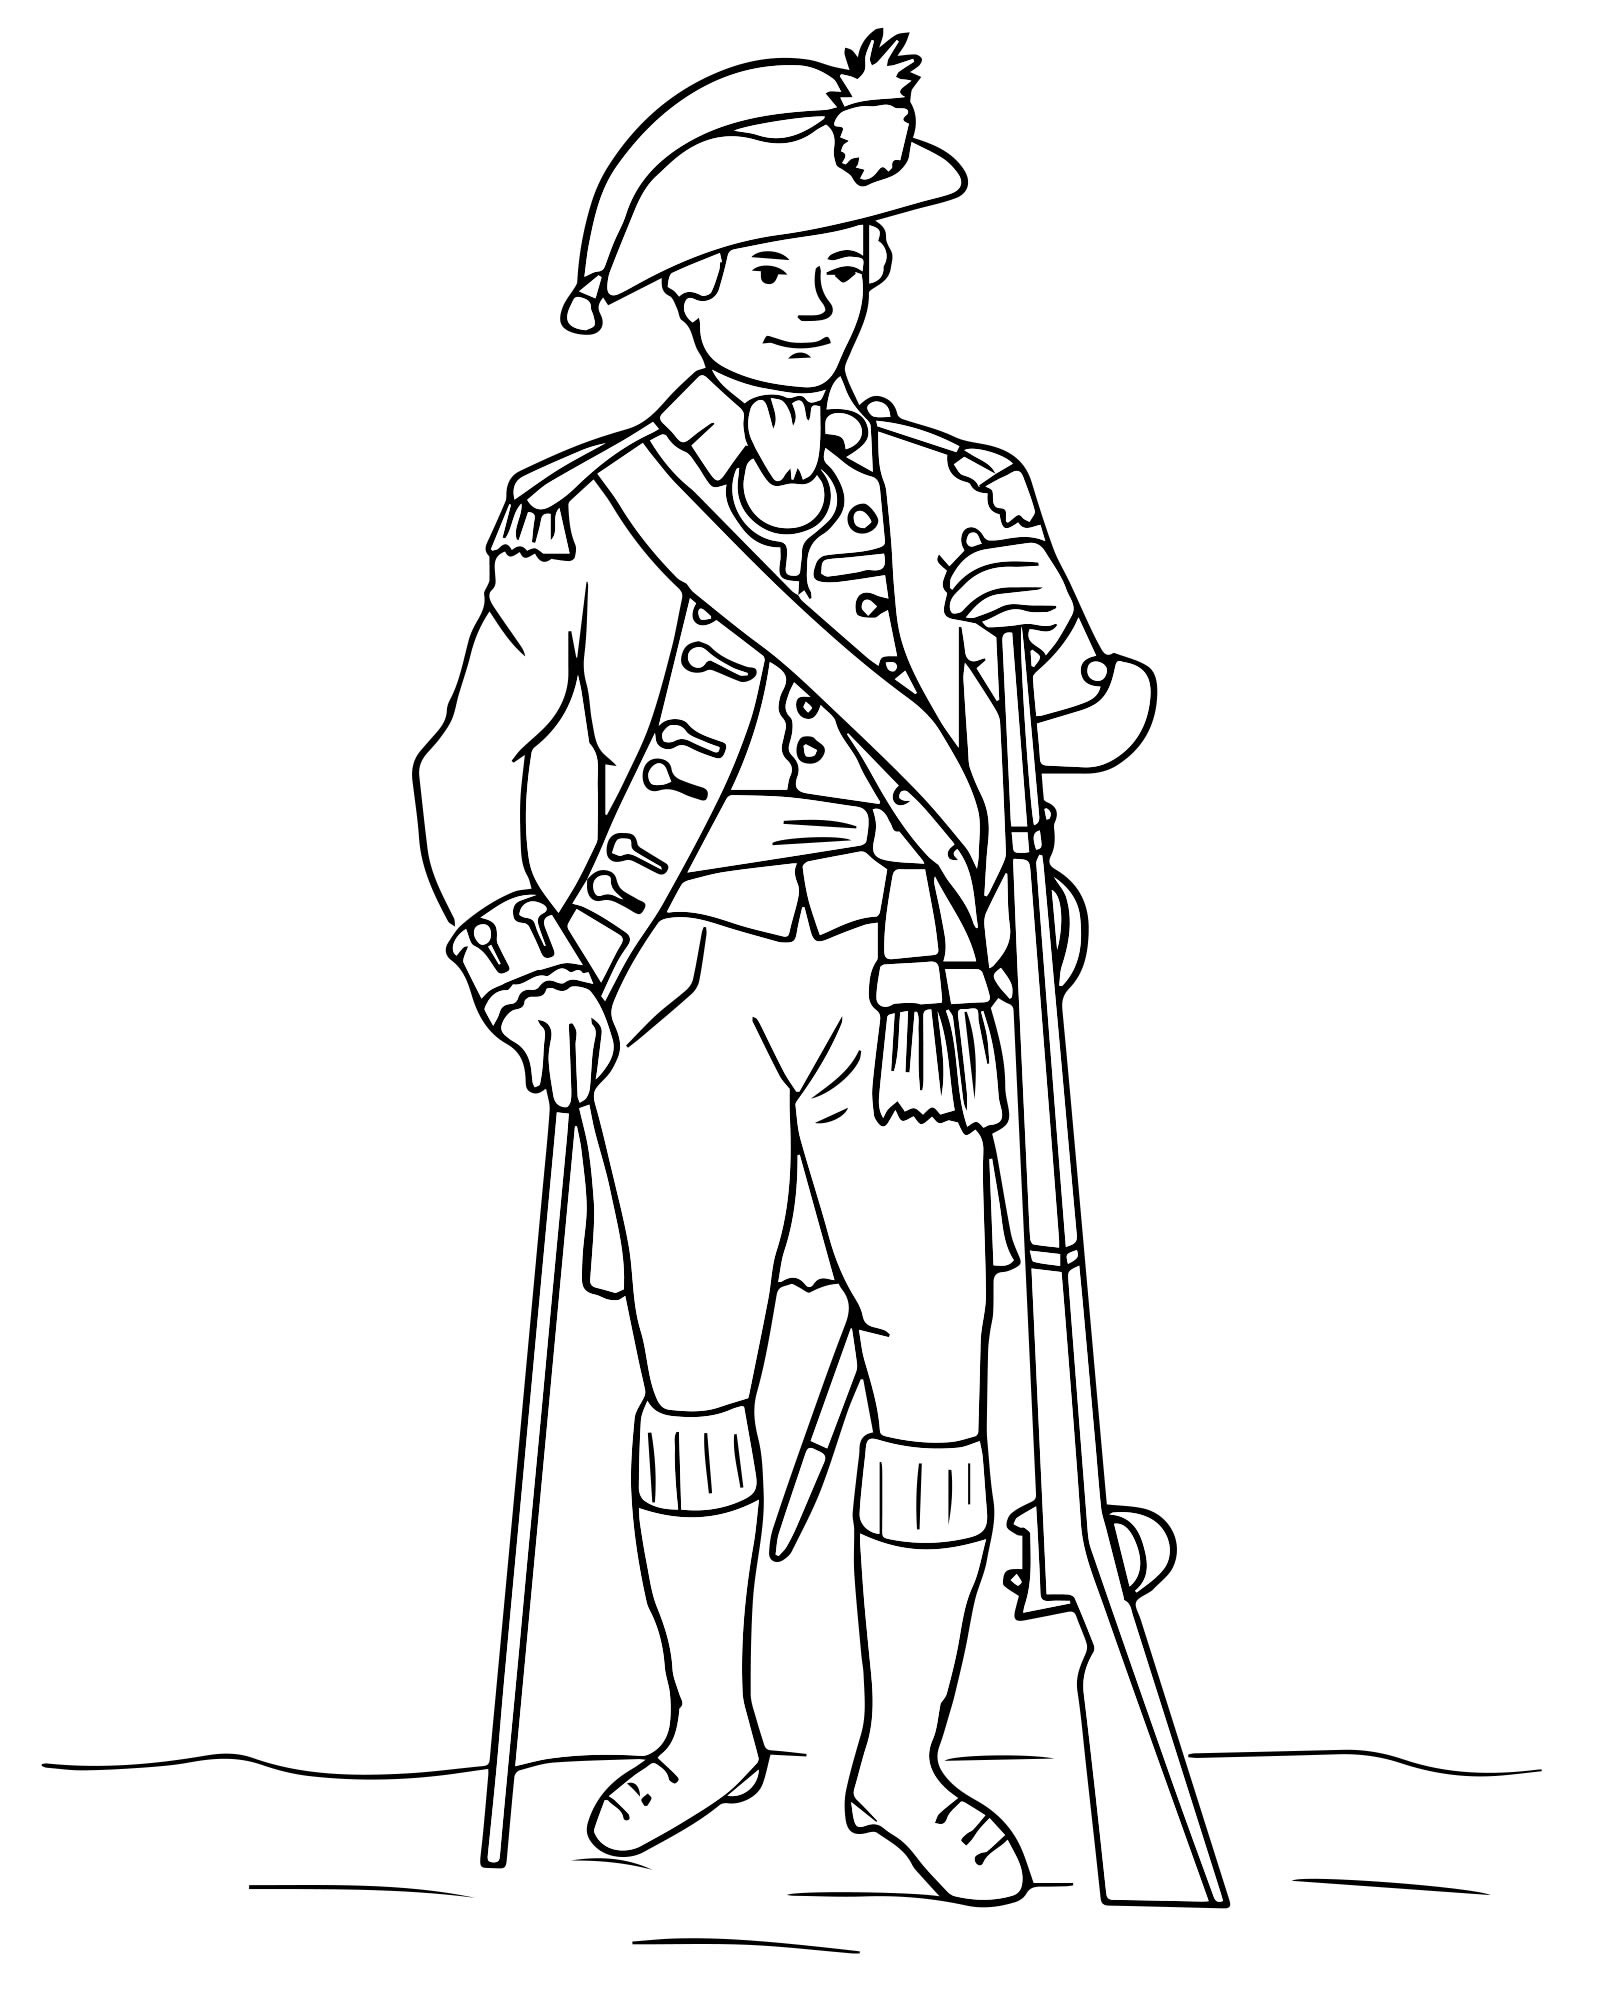 Dramatic soldiers of the Russian army coloring book